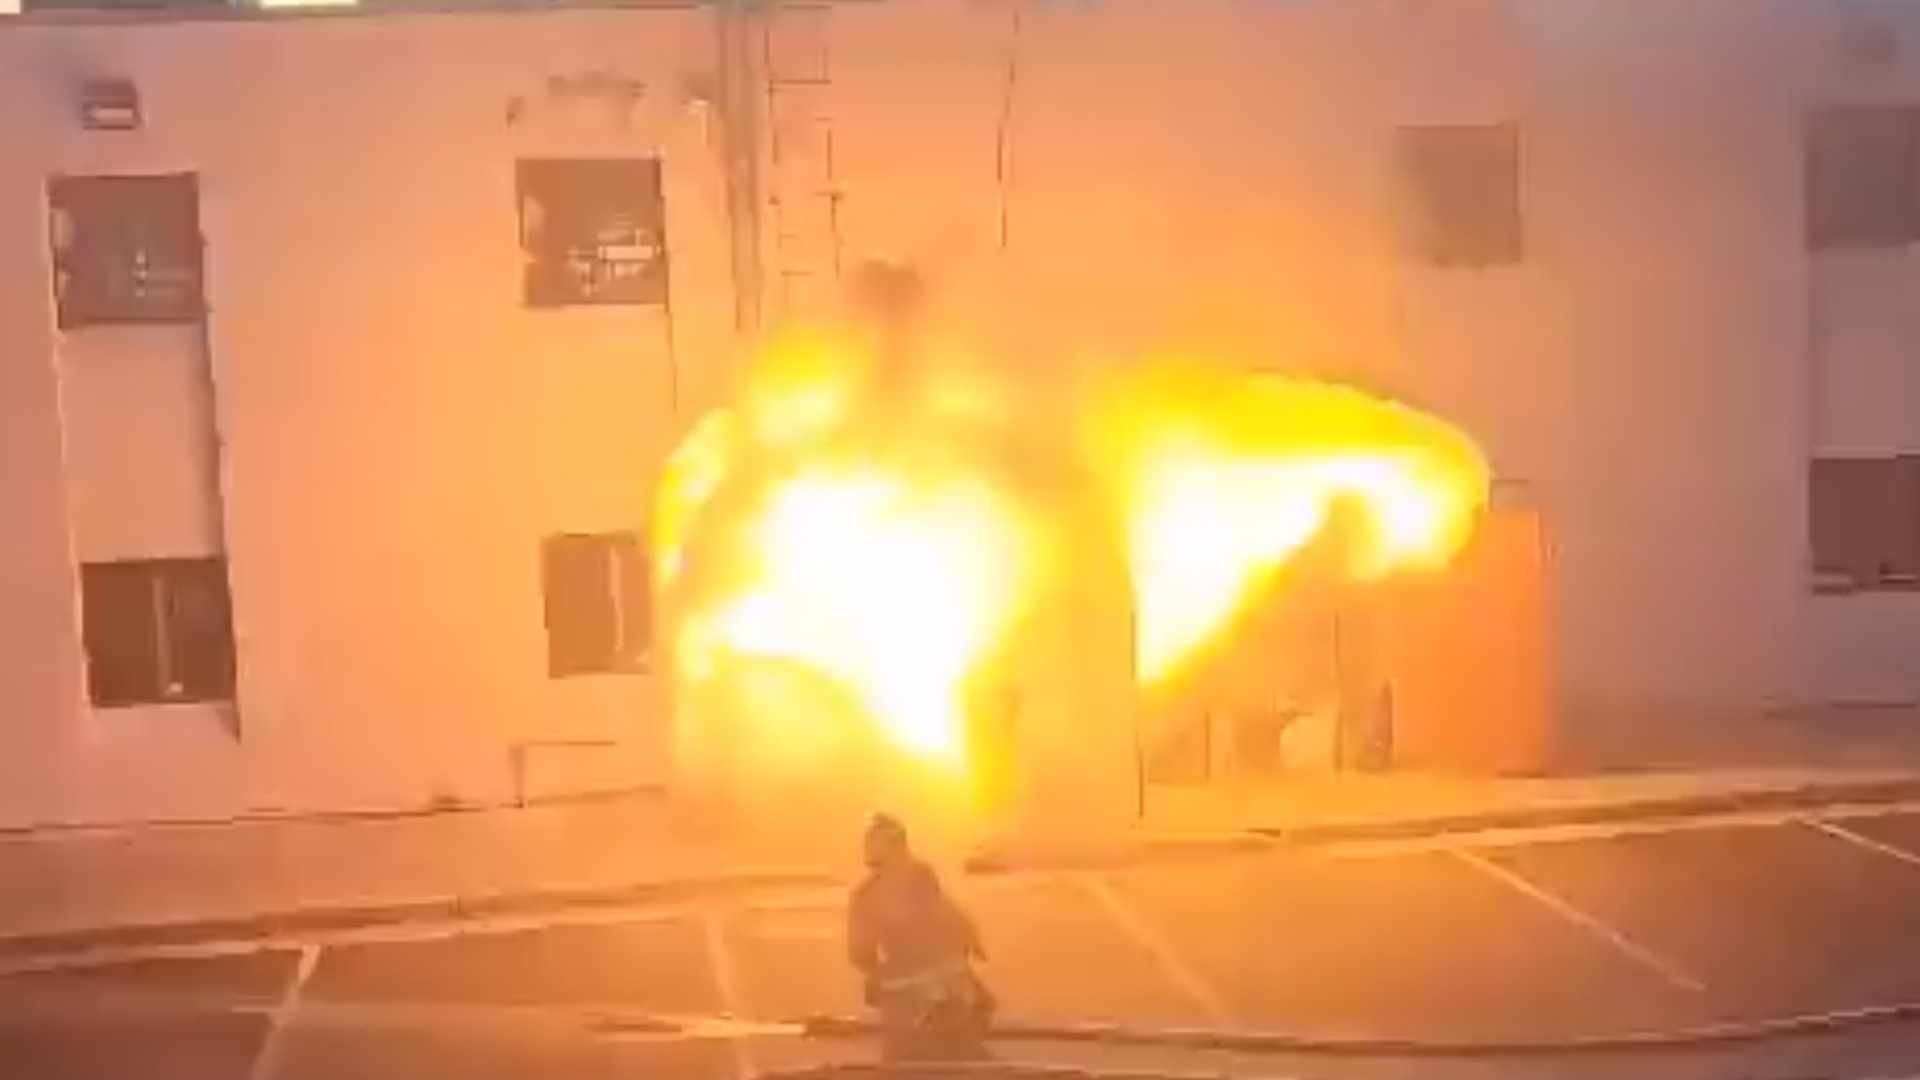 Despite the size and surprise of the fiery explosion, none of the firefighters were injured. Video courtesy: Fairfax County Fire and Rescue